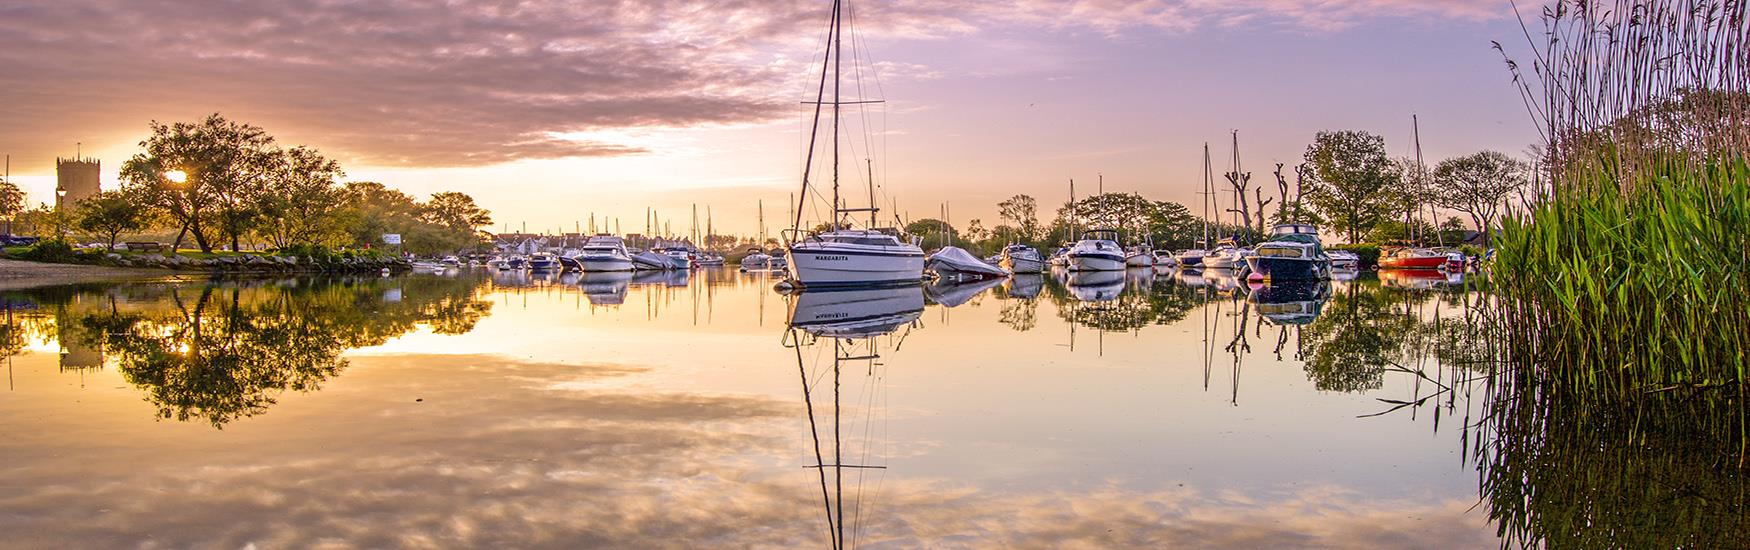 Stunning sunset over Christchurch harbour with boats moored and reflecting of the glassy water